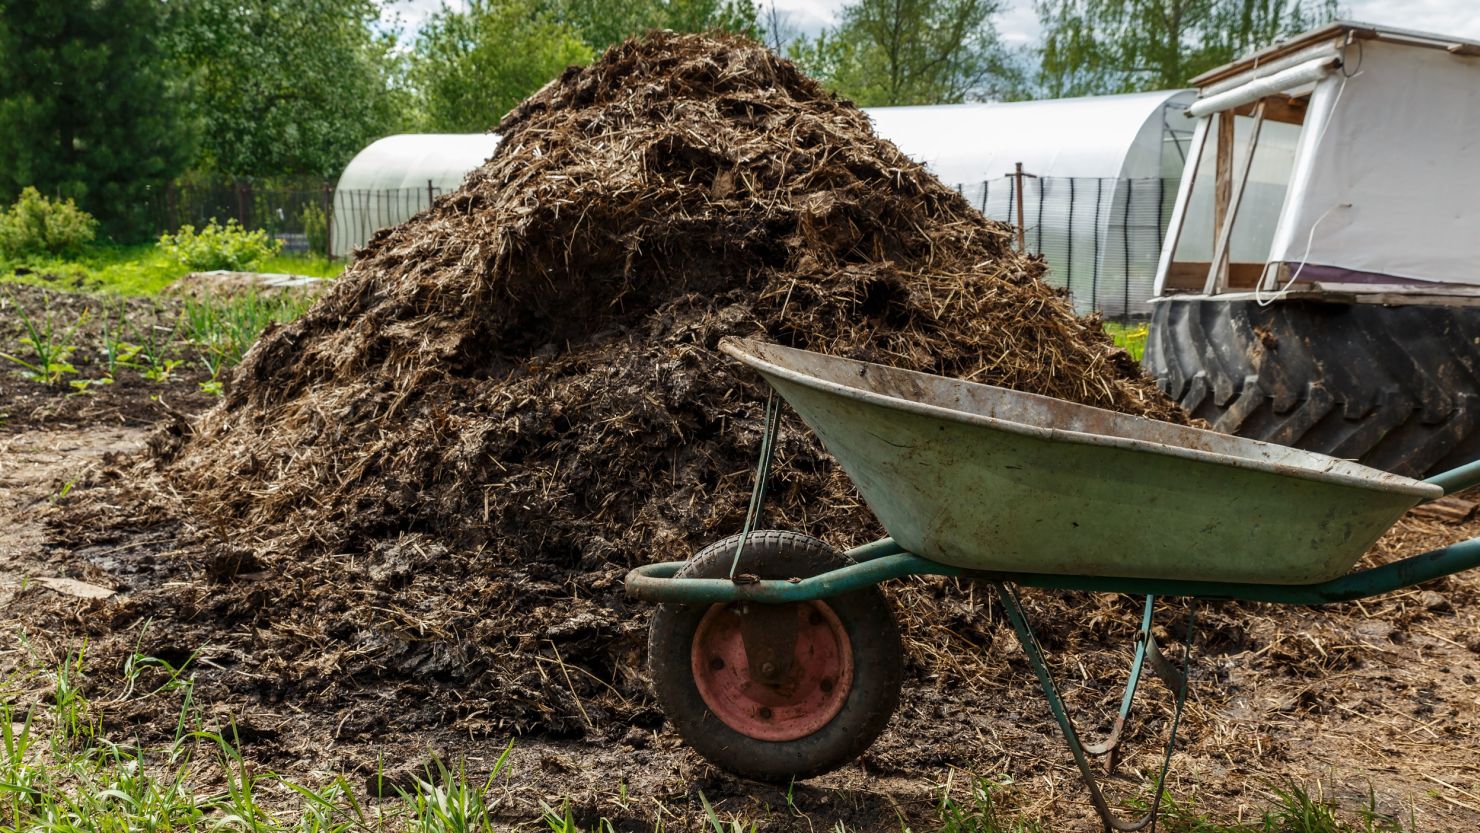 A man was sentenced to over six years in prison for running a multimillion-dollar scheme where he pretended to turn cow manure into green energy, authorities say.